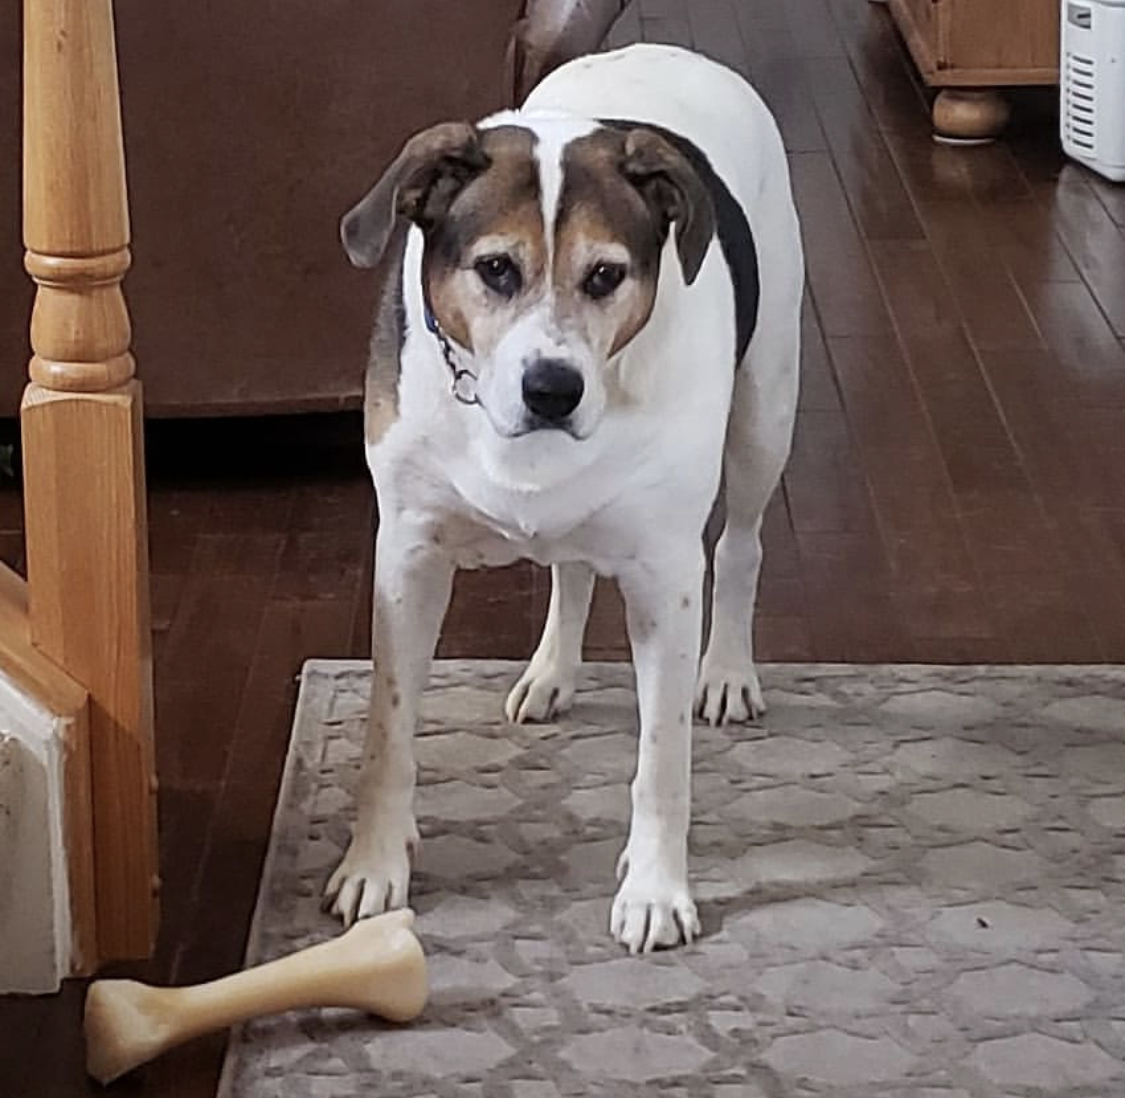 A Beaglador standing on the floor while staring